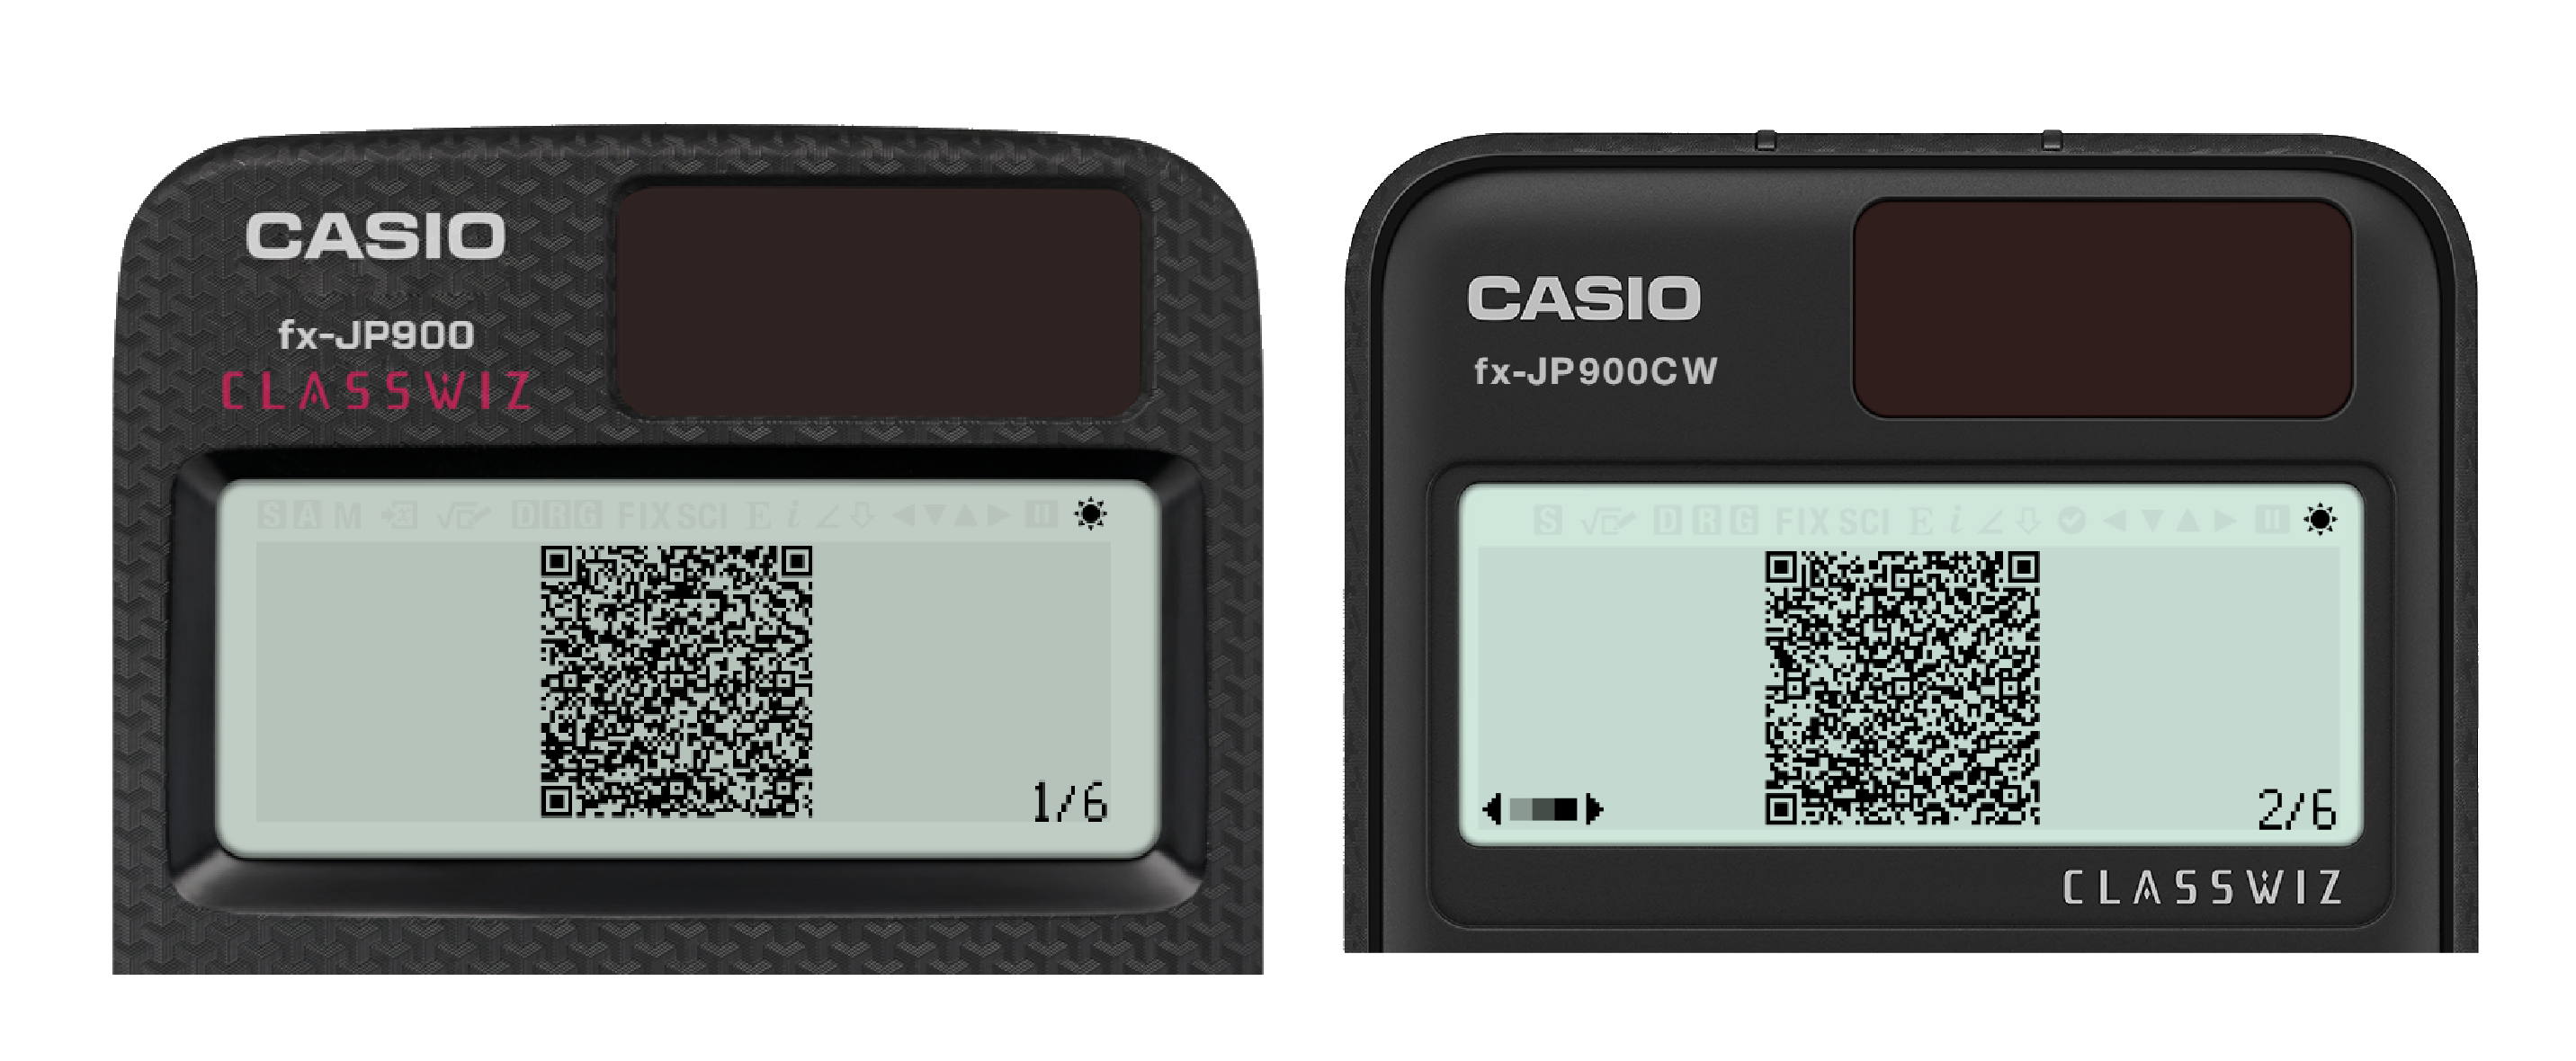 A Casio fx-JP900 and fx-JP900CW showing 2 different version 11 QR codes.